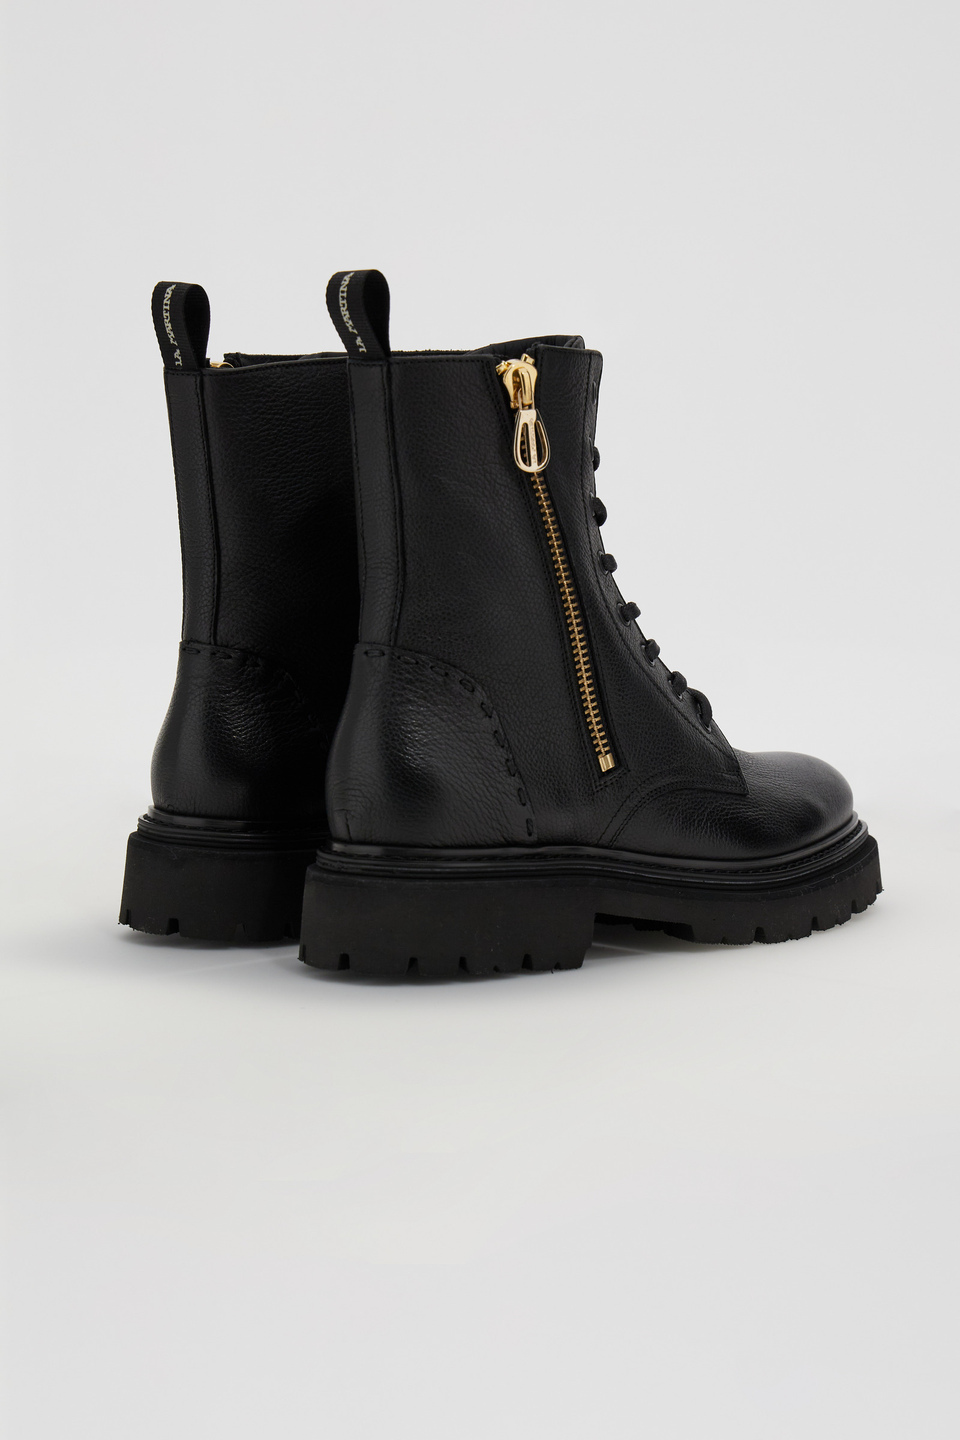 Zipped city boot in leather | La Martina - Official Online Shop